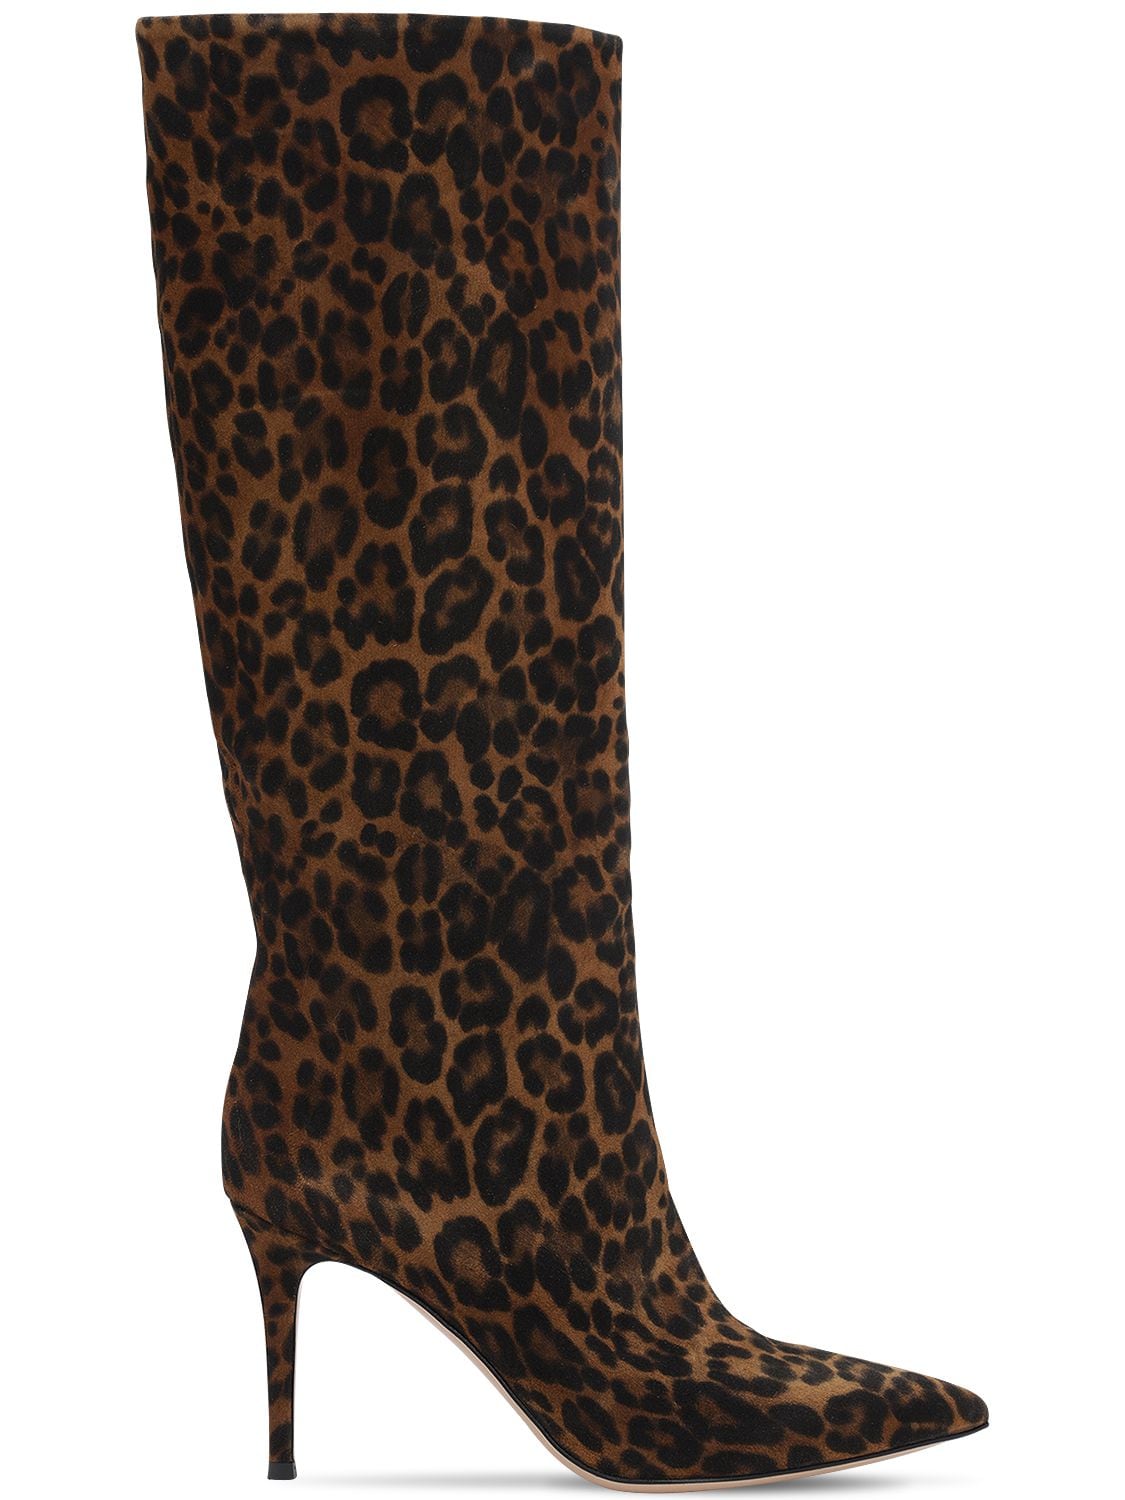 GIANVITO ROSSI 85MM LEOPARD PRINT SUEDE TALL BOOTS,70I83R011-VEVYQVMGTEVPUEFSRA2